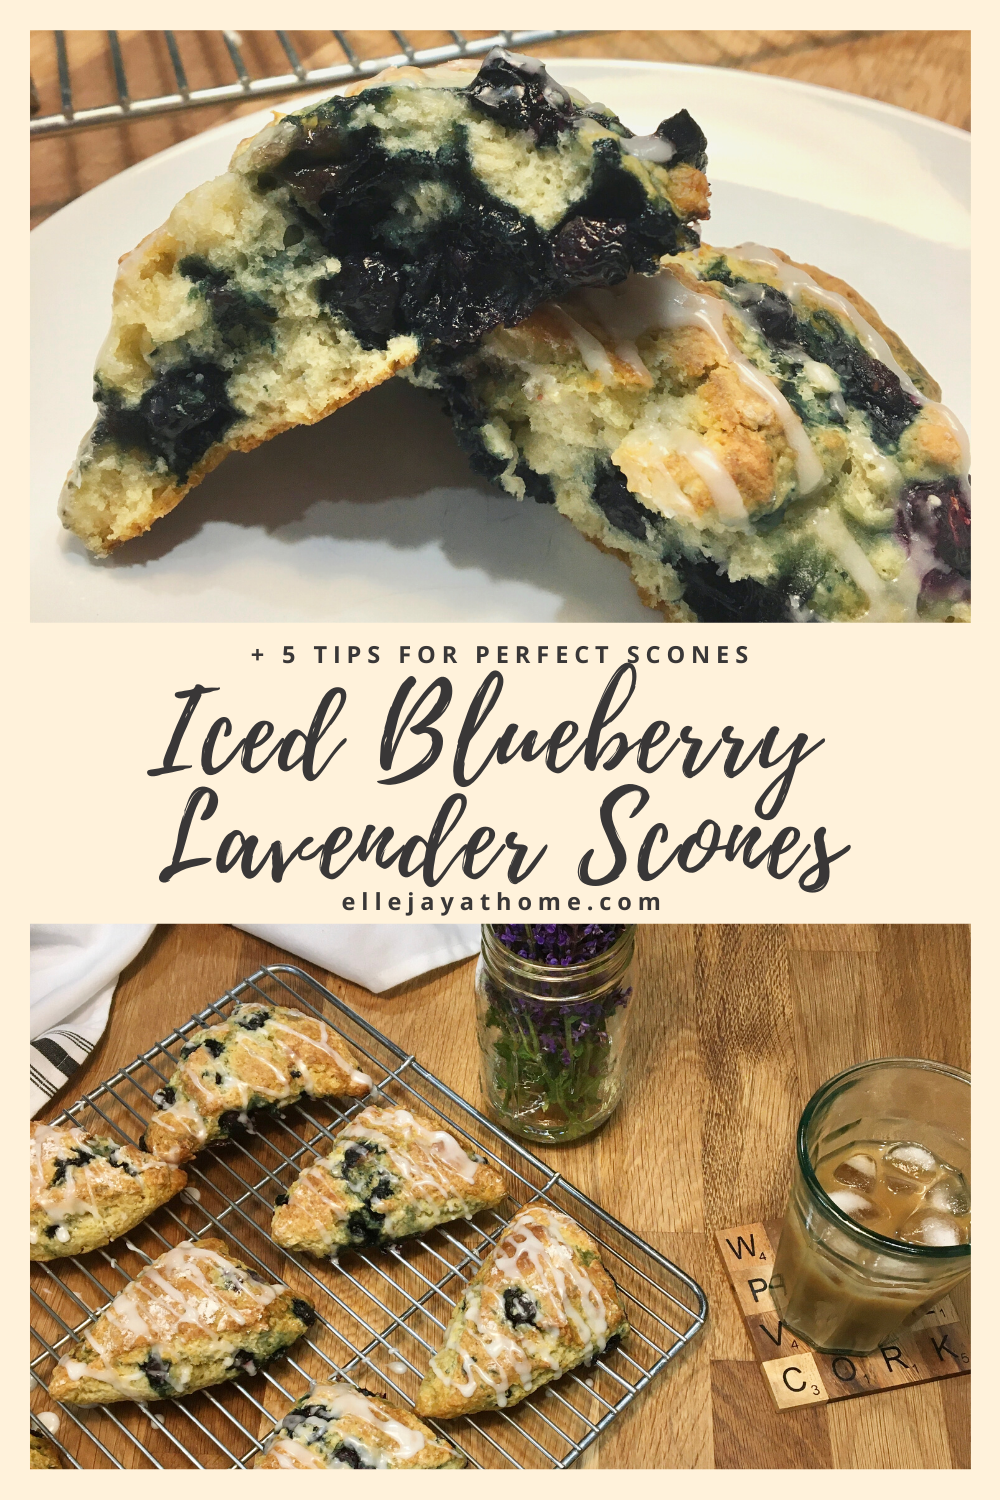 Iced Blueberry Lavender Scones plus 5 tips for perfect scones